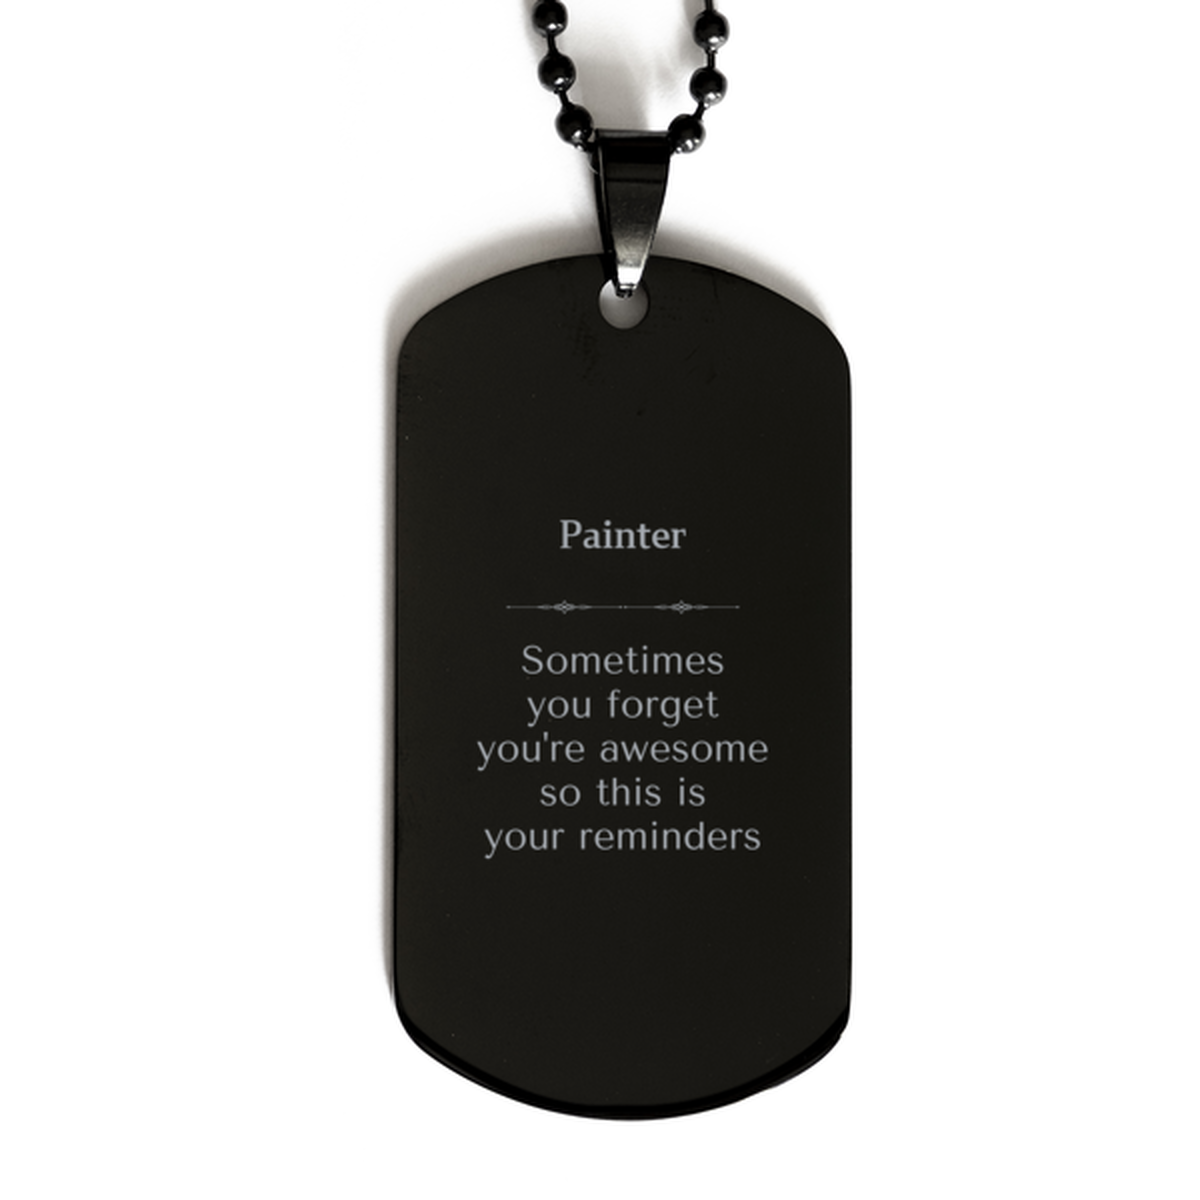 Sentimental Painter Black Dog Tag, Painter Sometimes you forget you're awesome so this is your reminders, Graduation Christmas Birthday Gifts for Painter, Men, Women, Coworkers